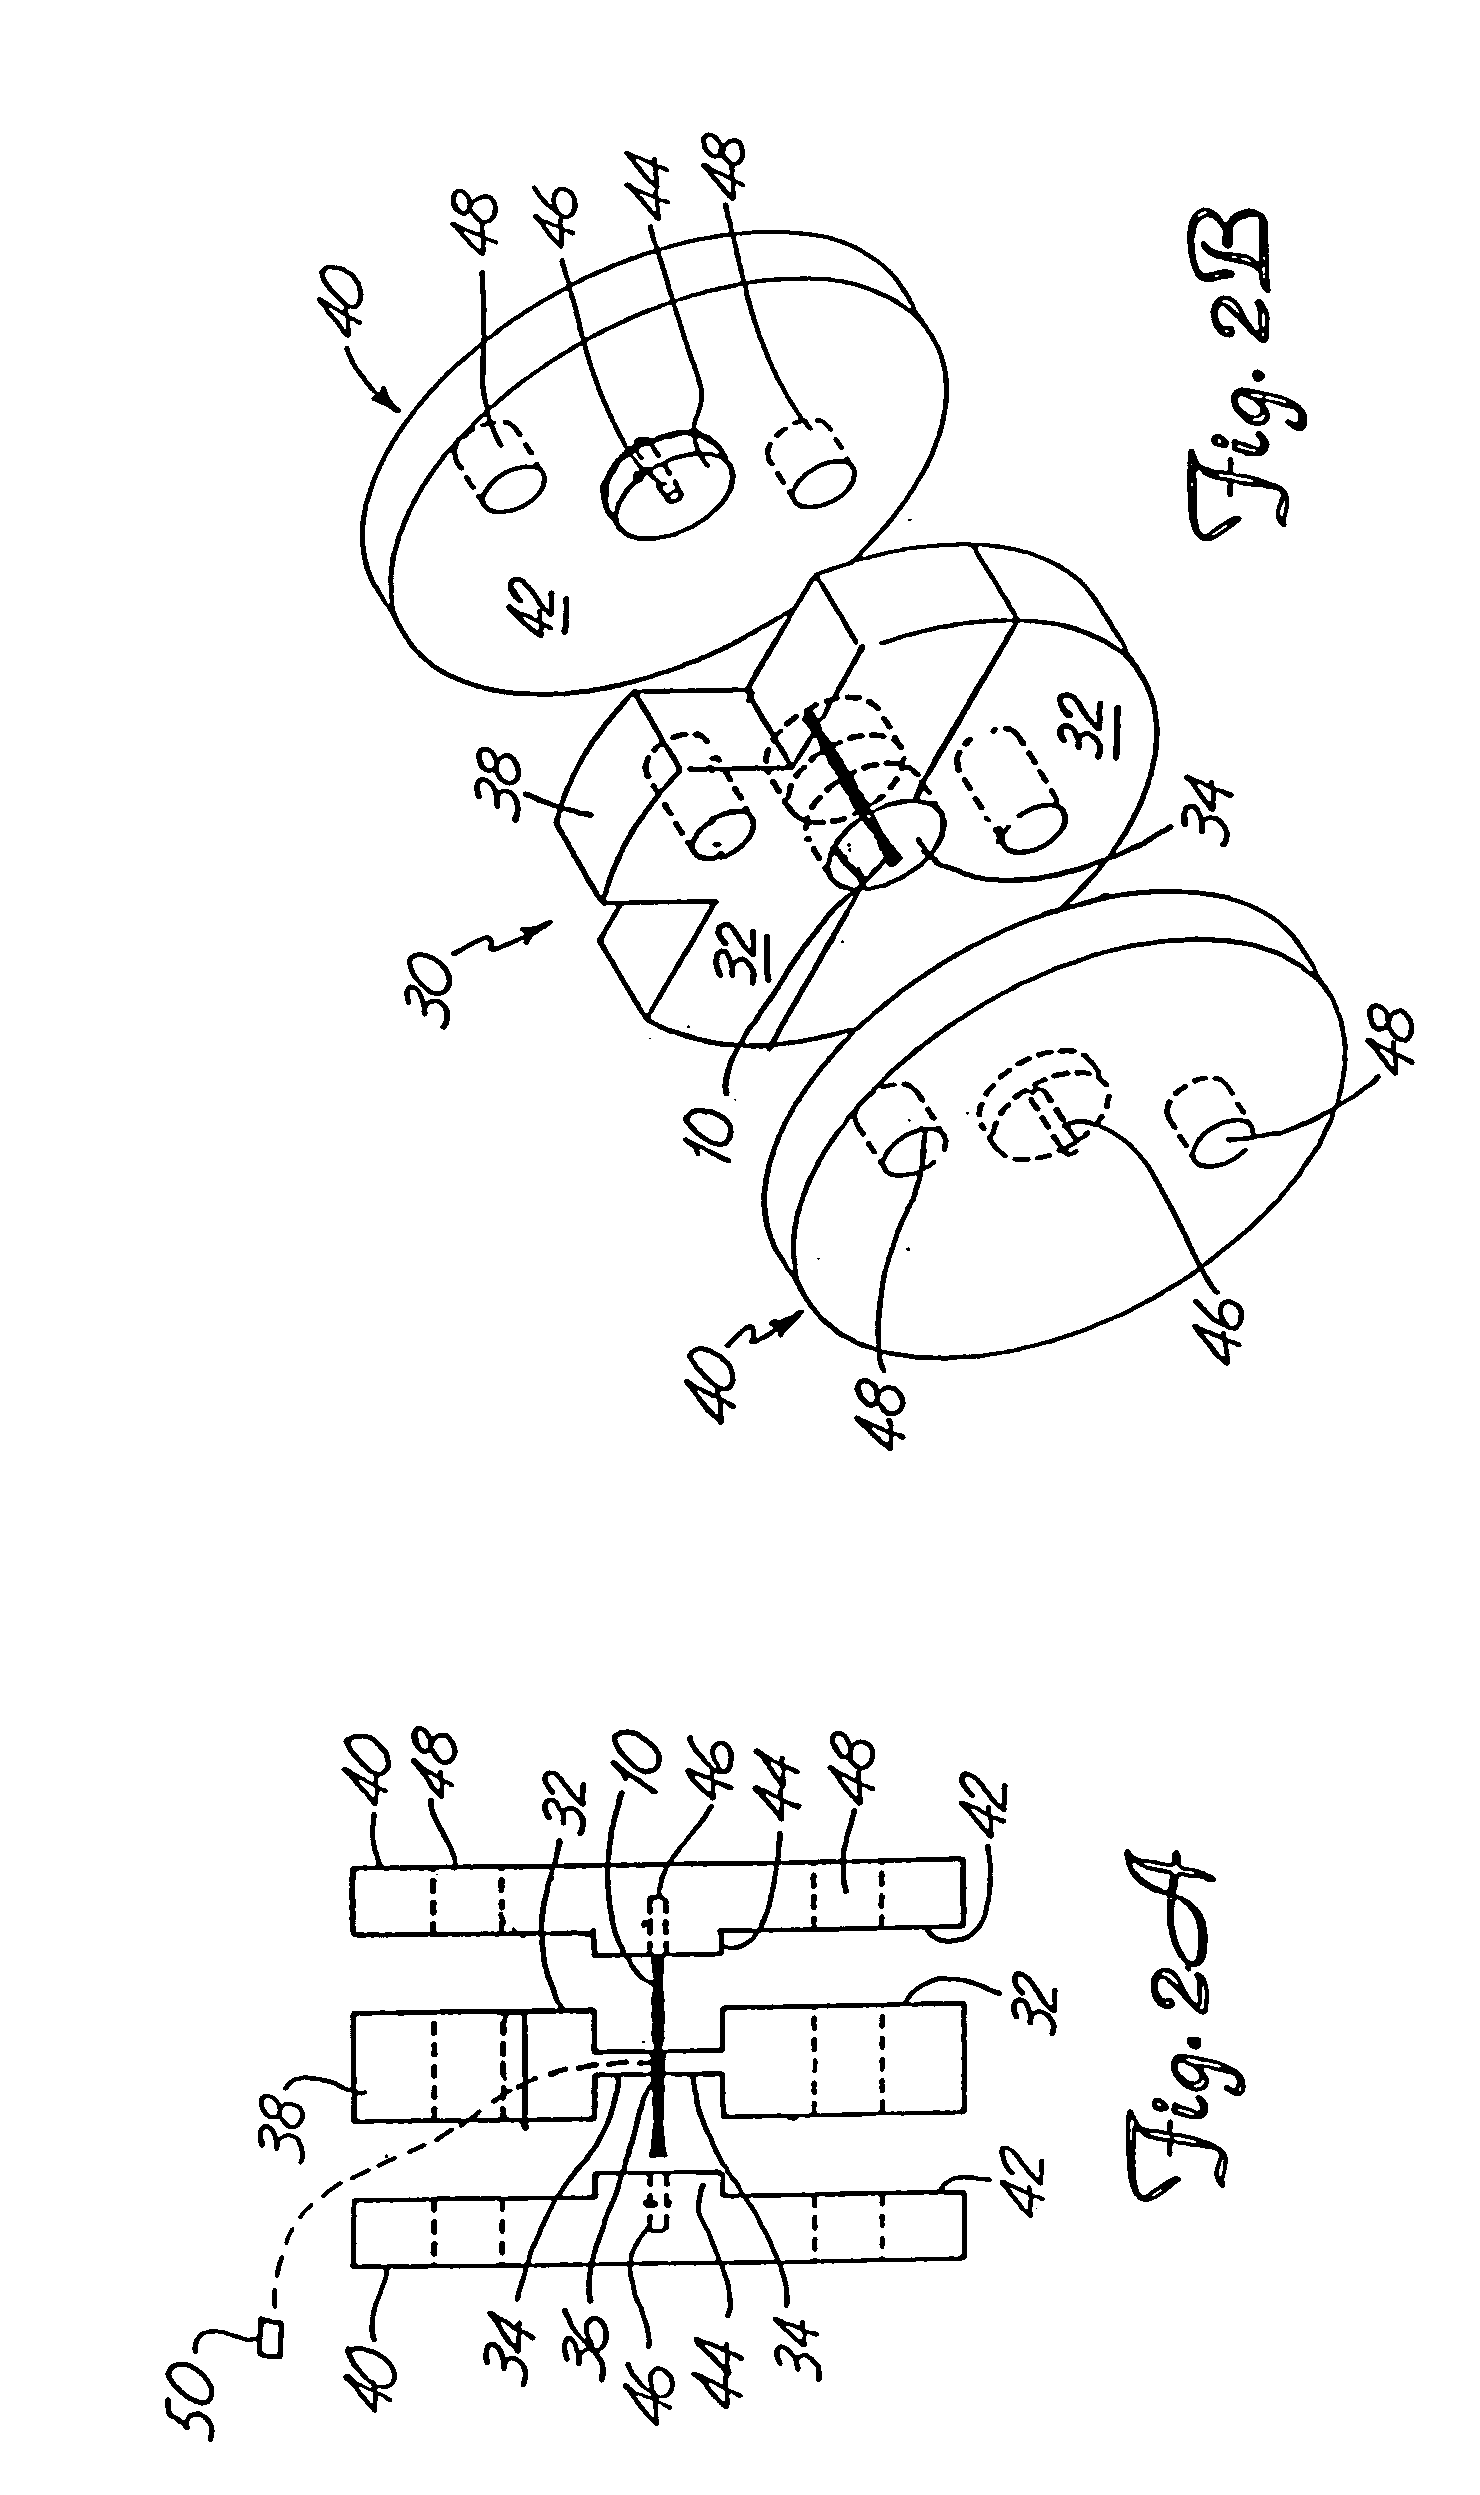 Method and device for filtering body fluid